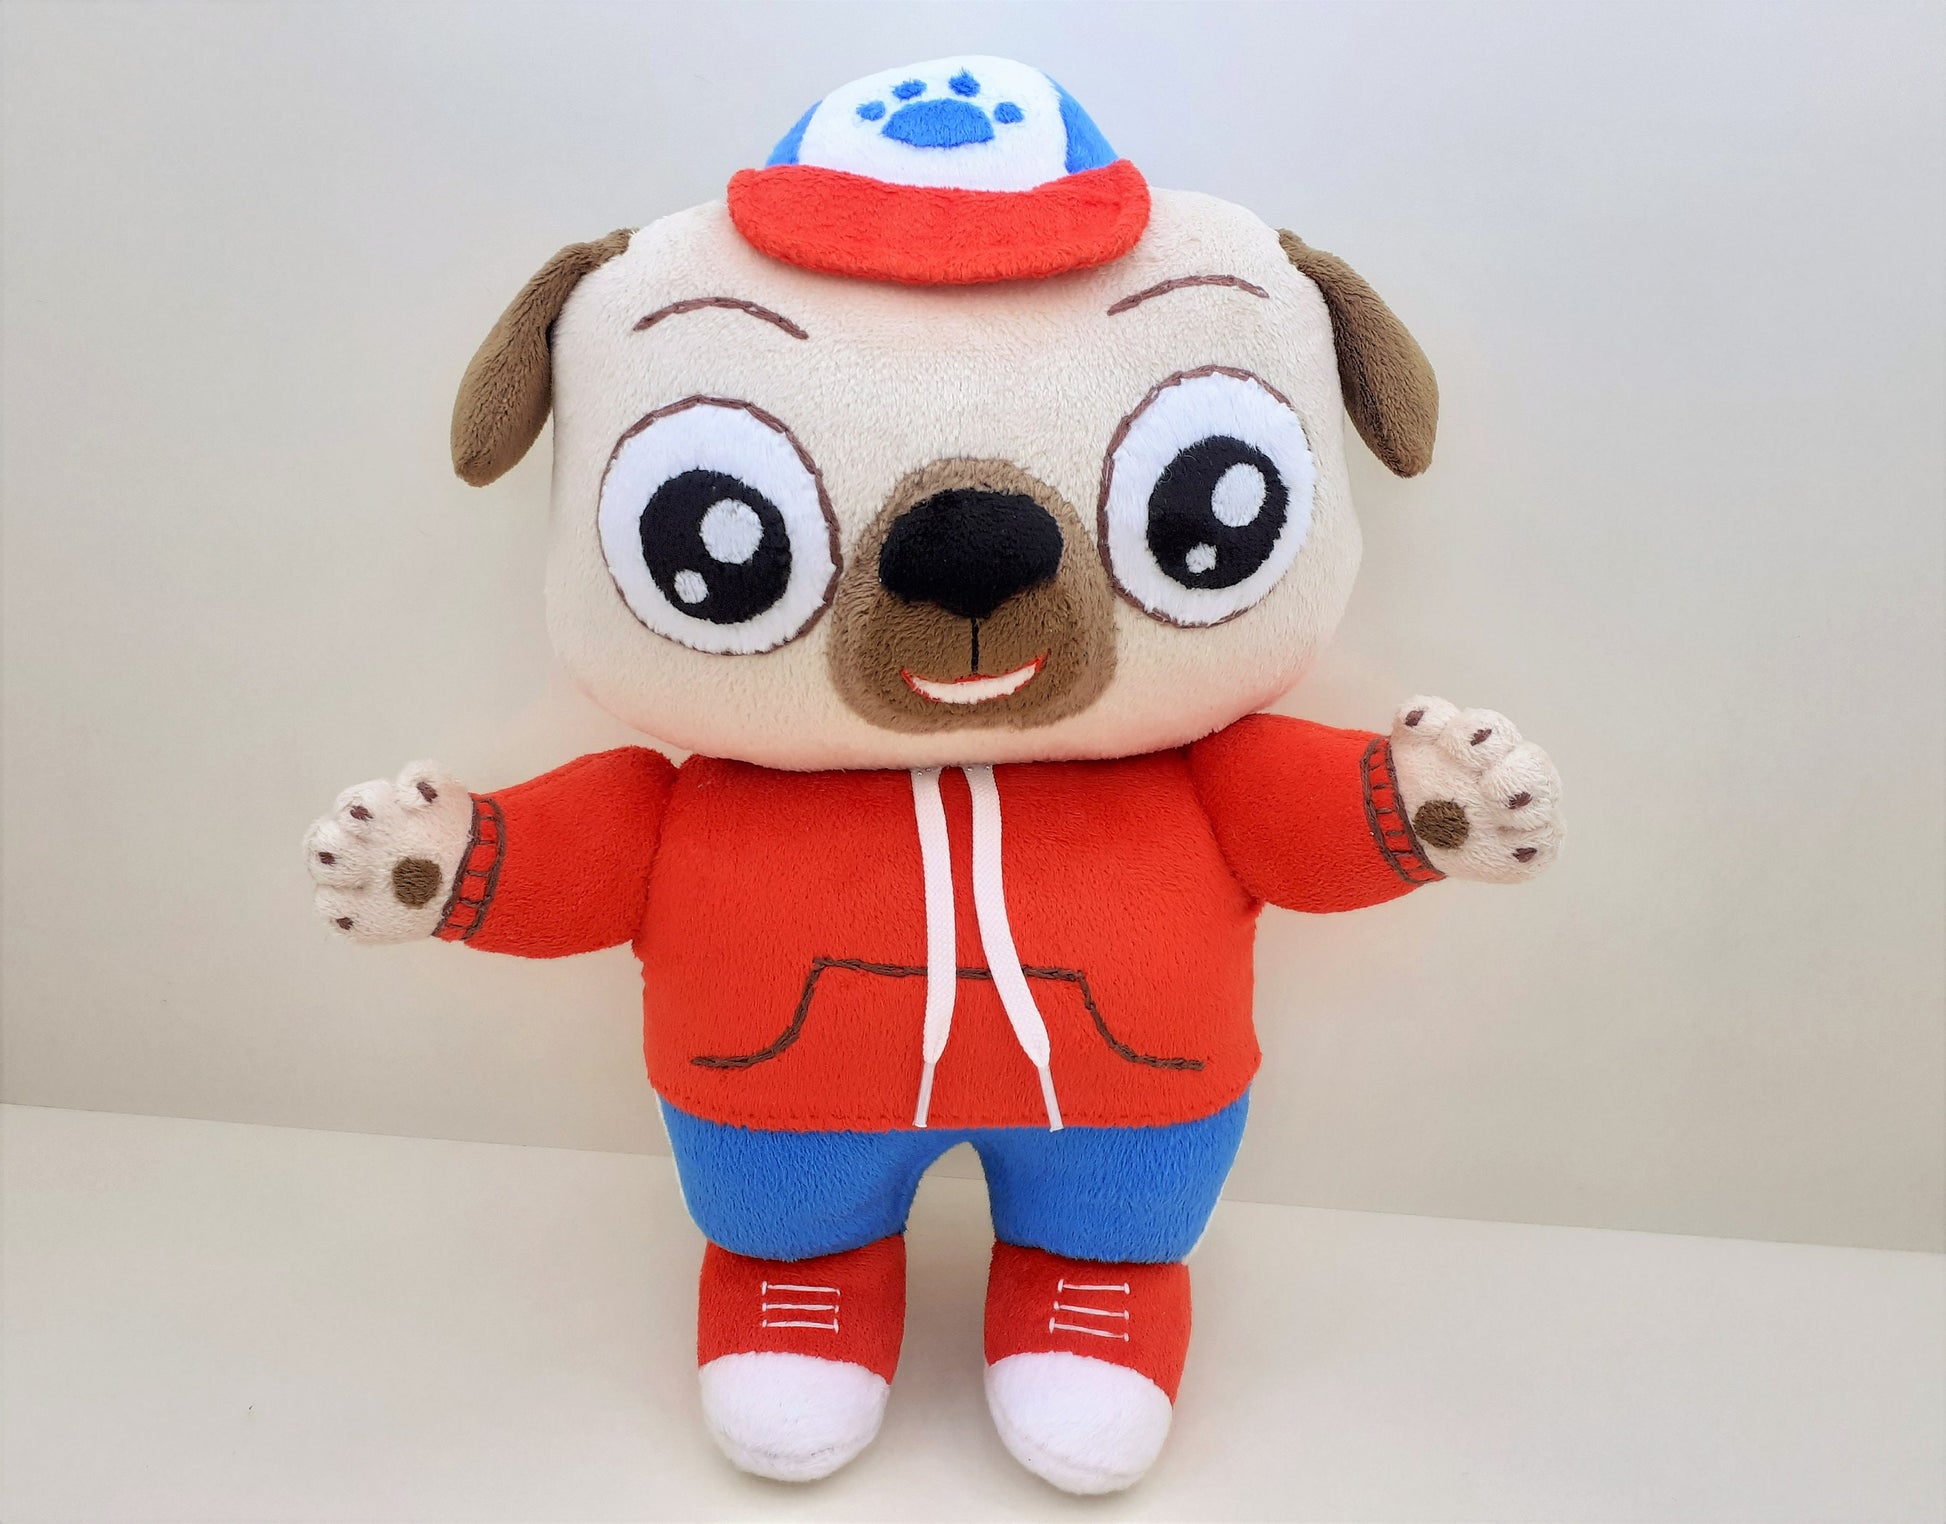 Chip And Potato Toys Pug Dog And Mouse Plush Stuffed Animal Toy - Price  history & Review, AliExpress Seller - VIPSula Store